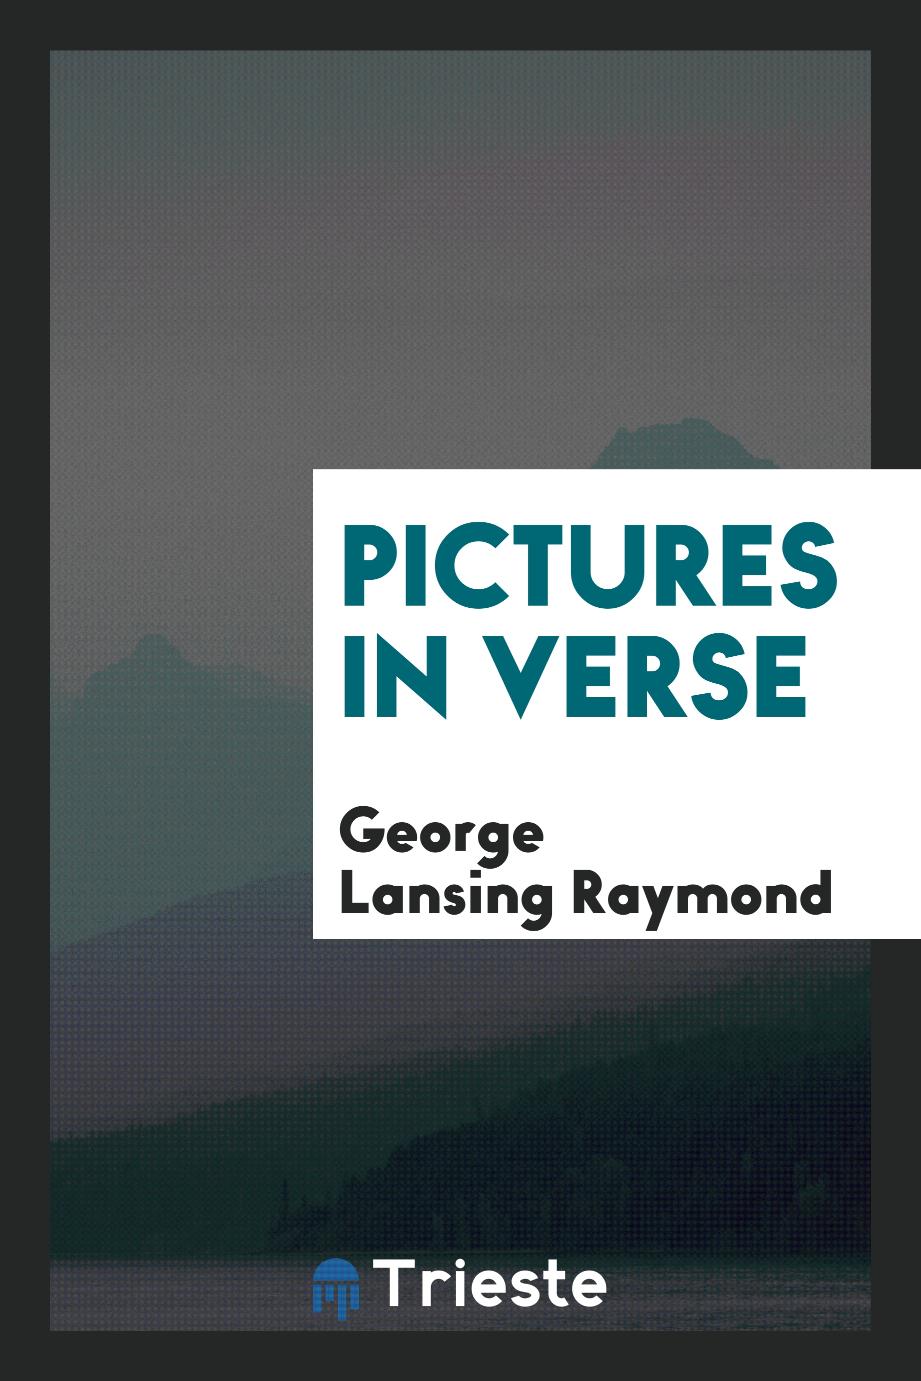 Pictures in verse